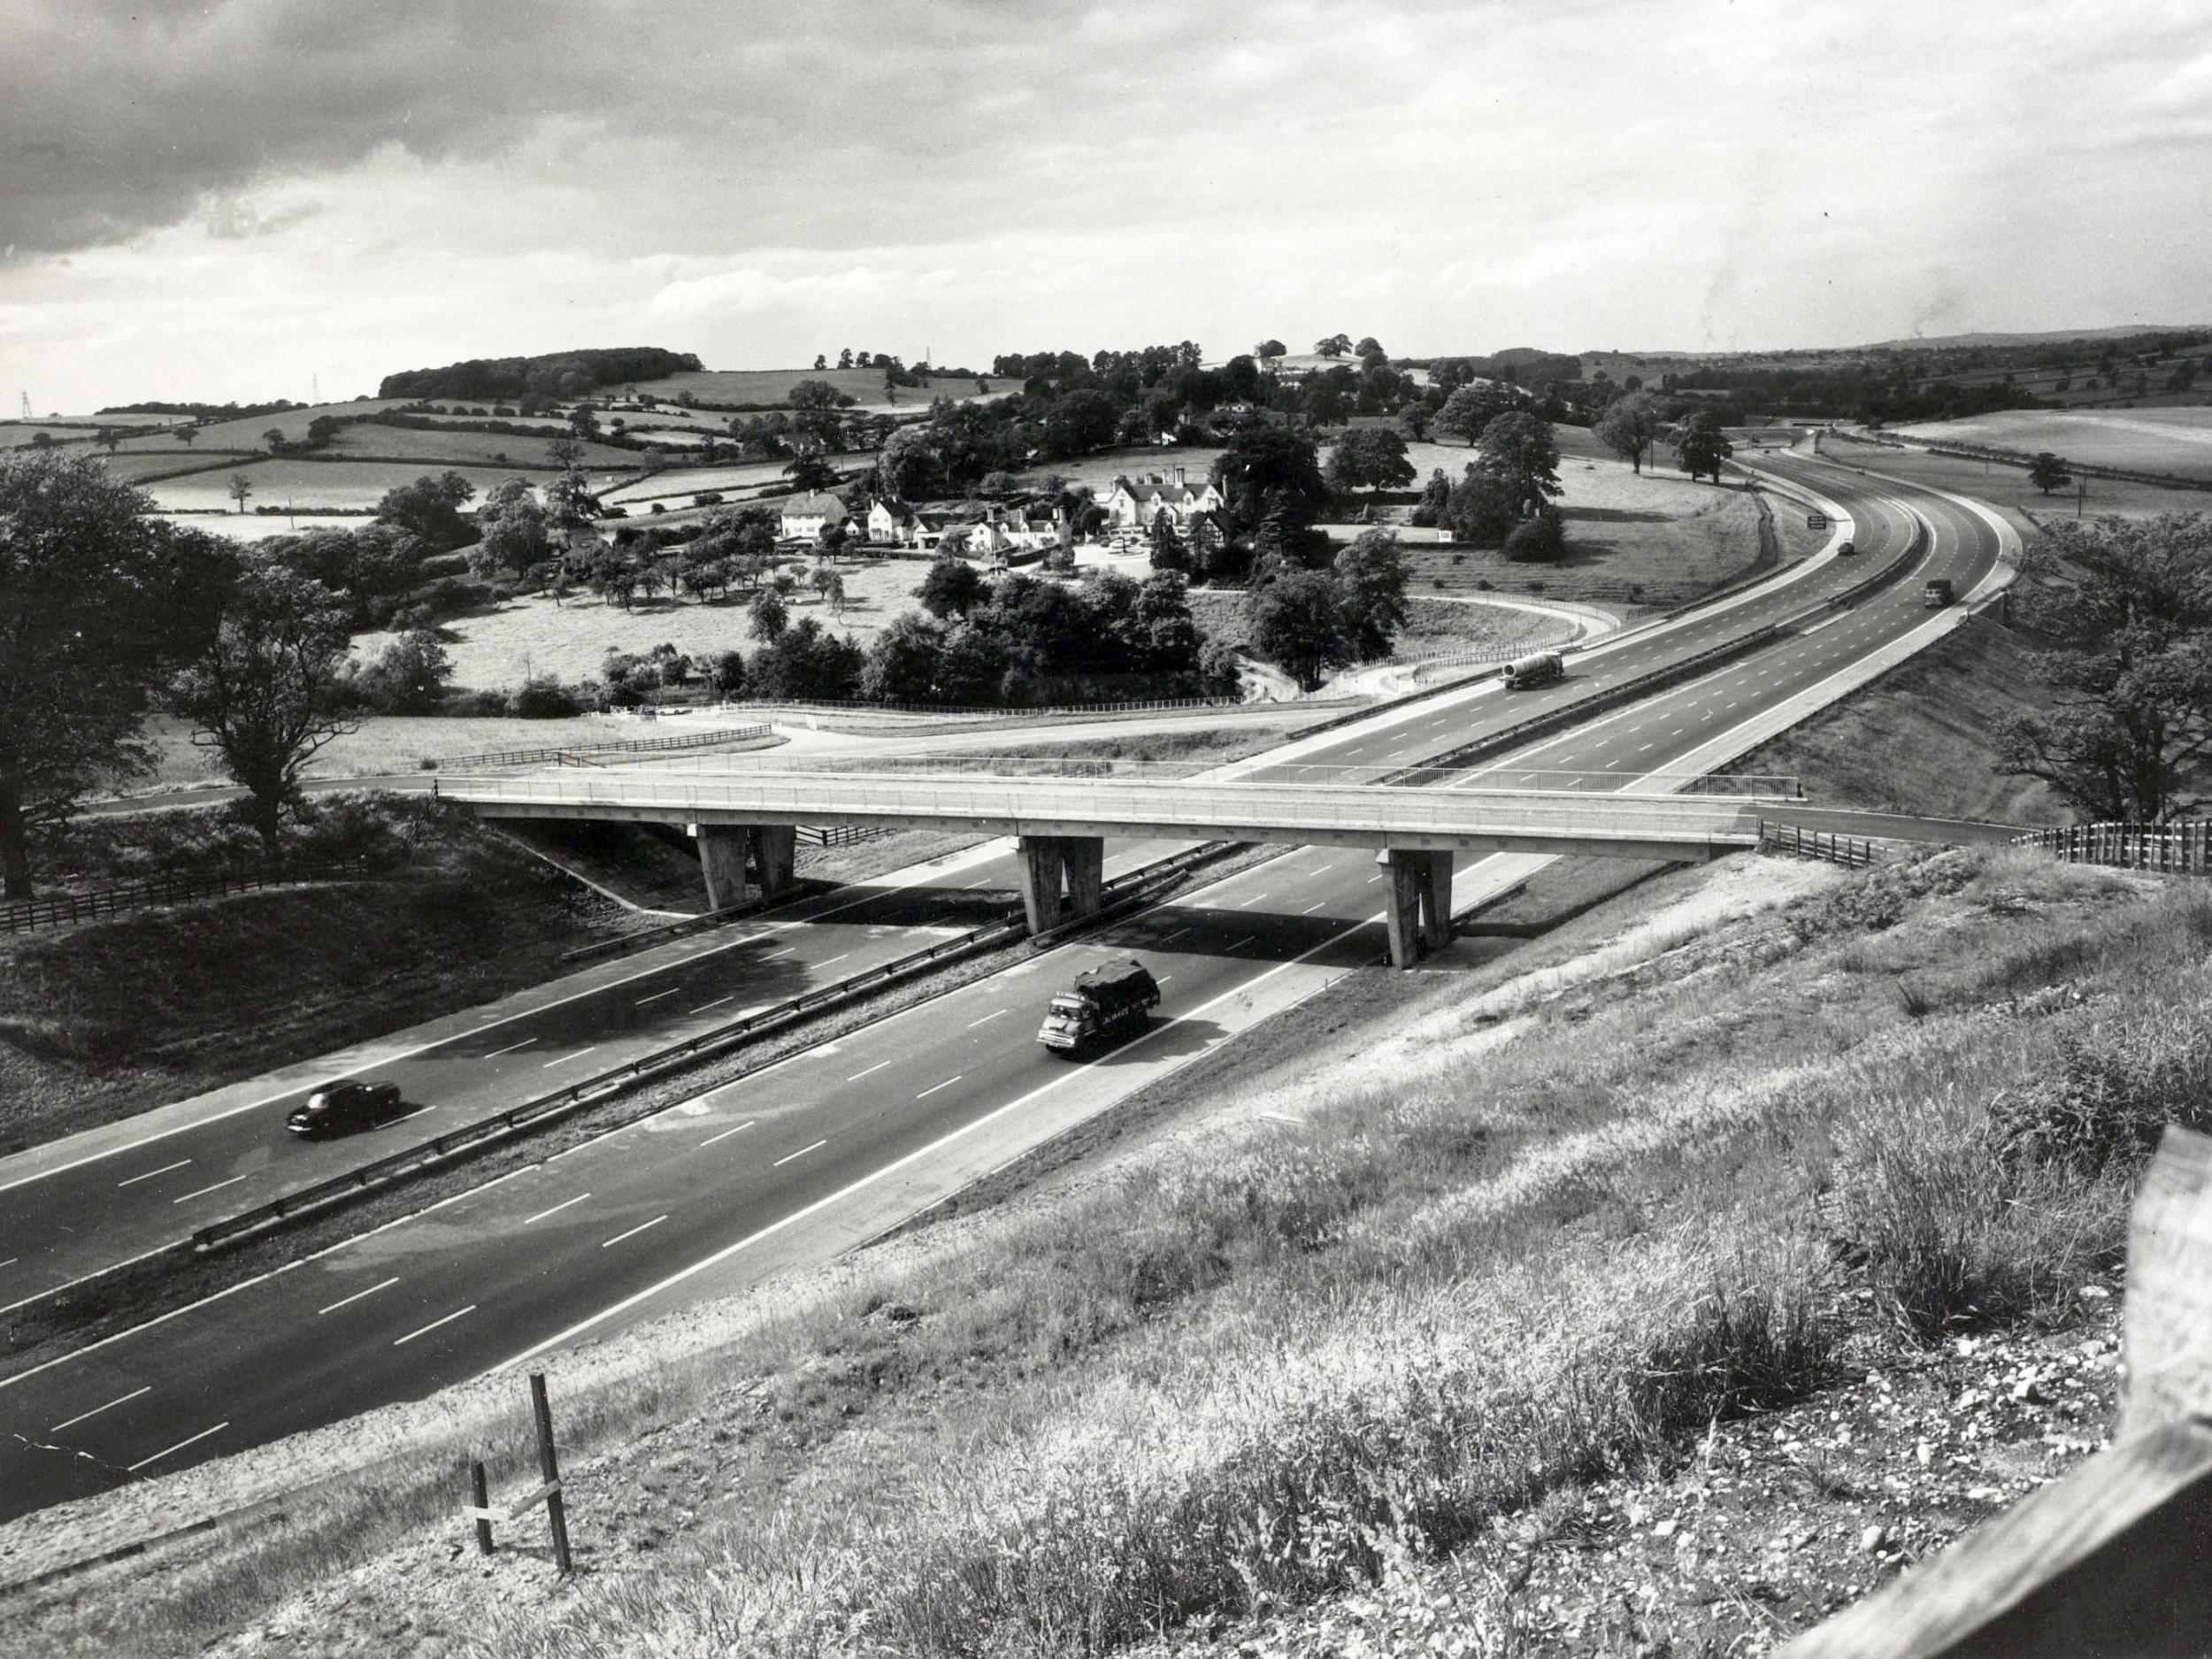 The Special Roads Act of 1949 made provision for a new concept: roads only open to motor traffic, and what would become the M6 pioneered the idea